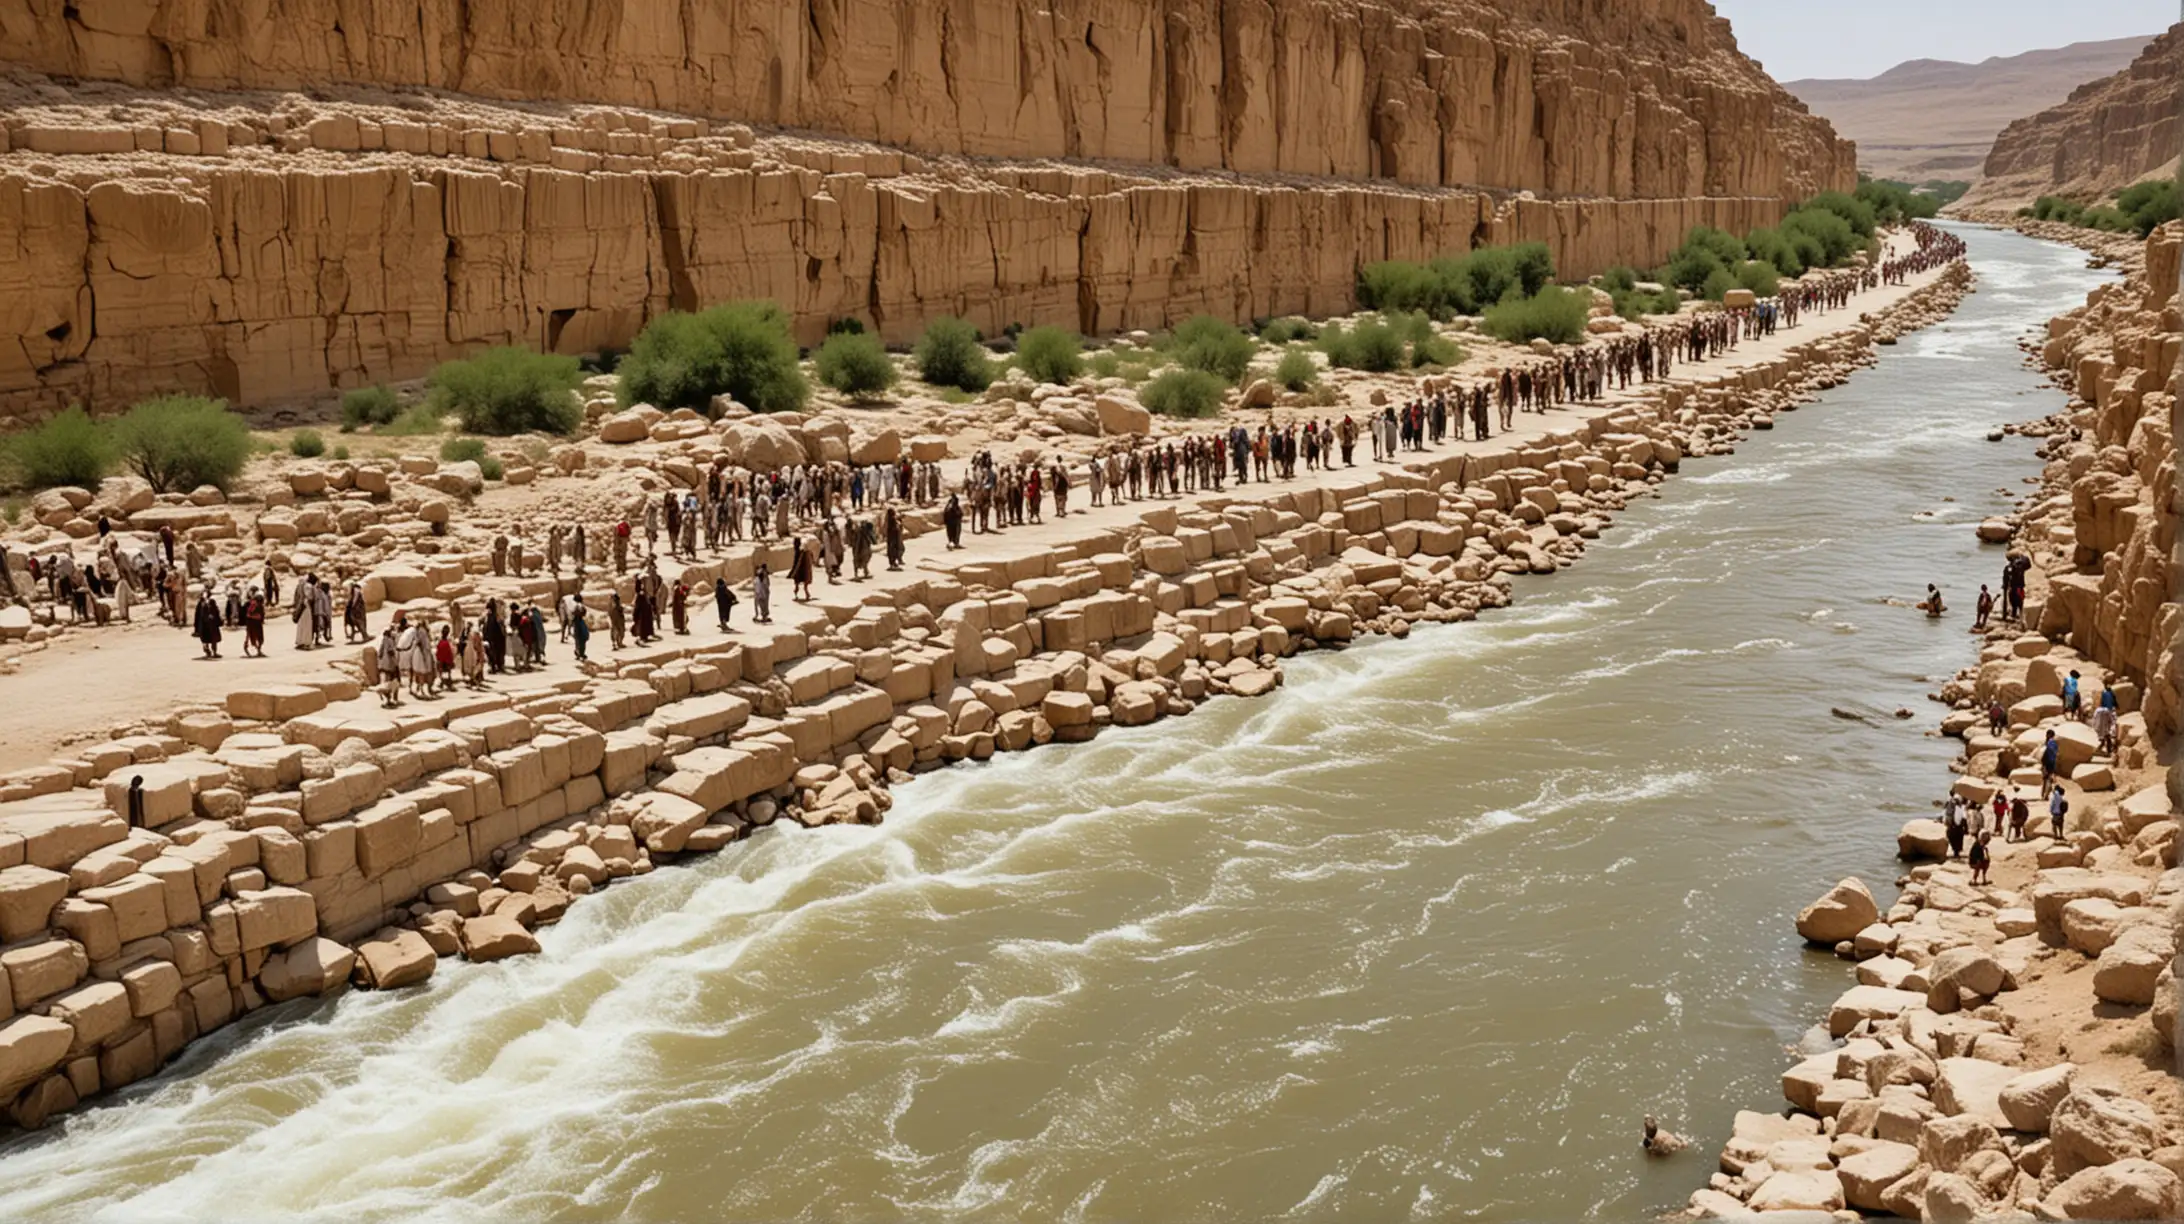 A group of people being led by the Biblical Joshua crossing the River Jordan, where the water is standing up like a wall on the left, and a wall on the right.